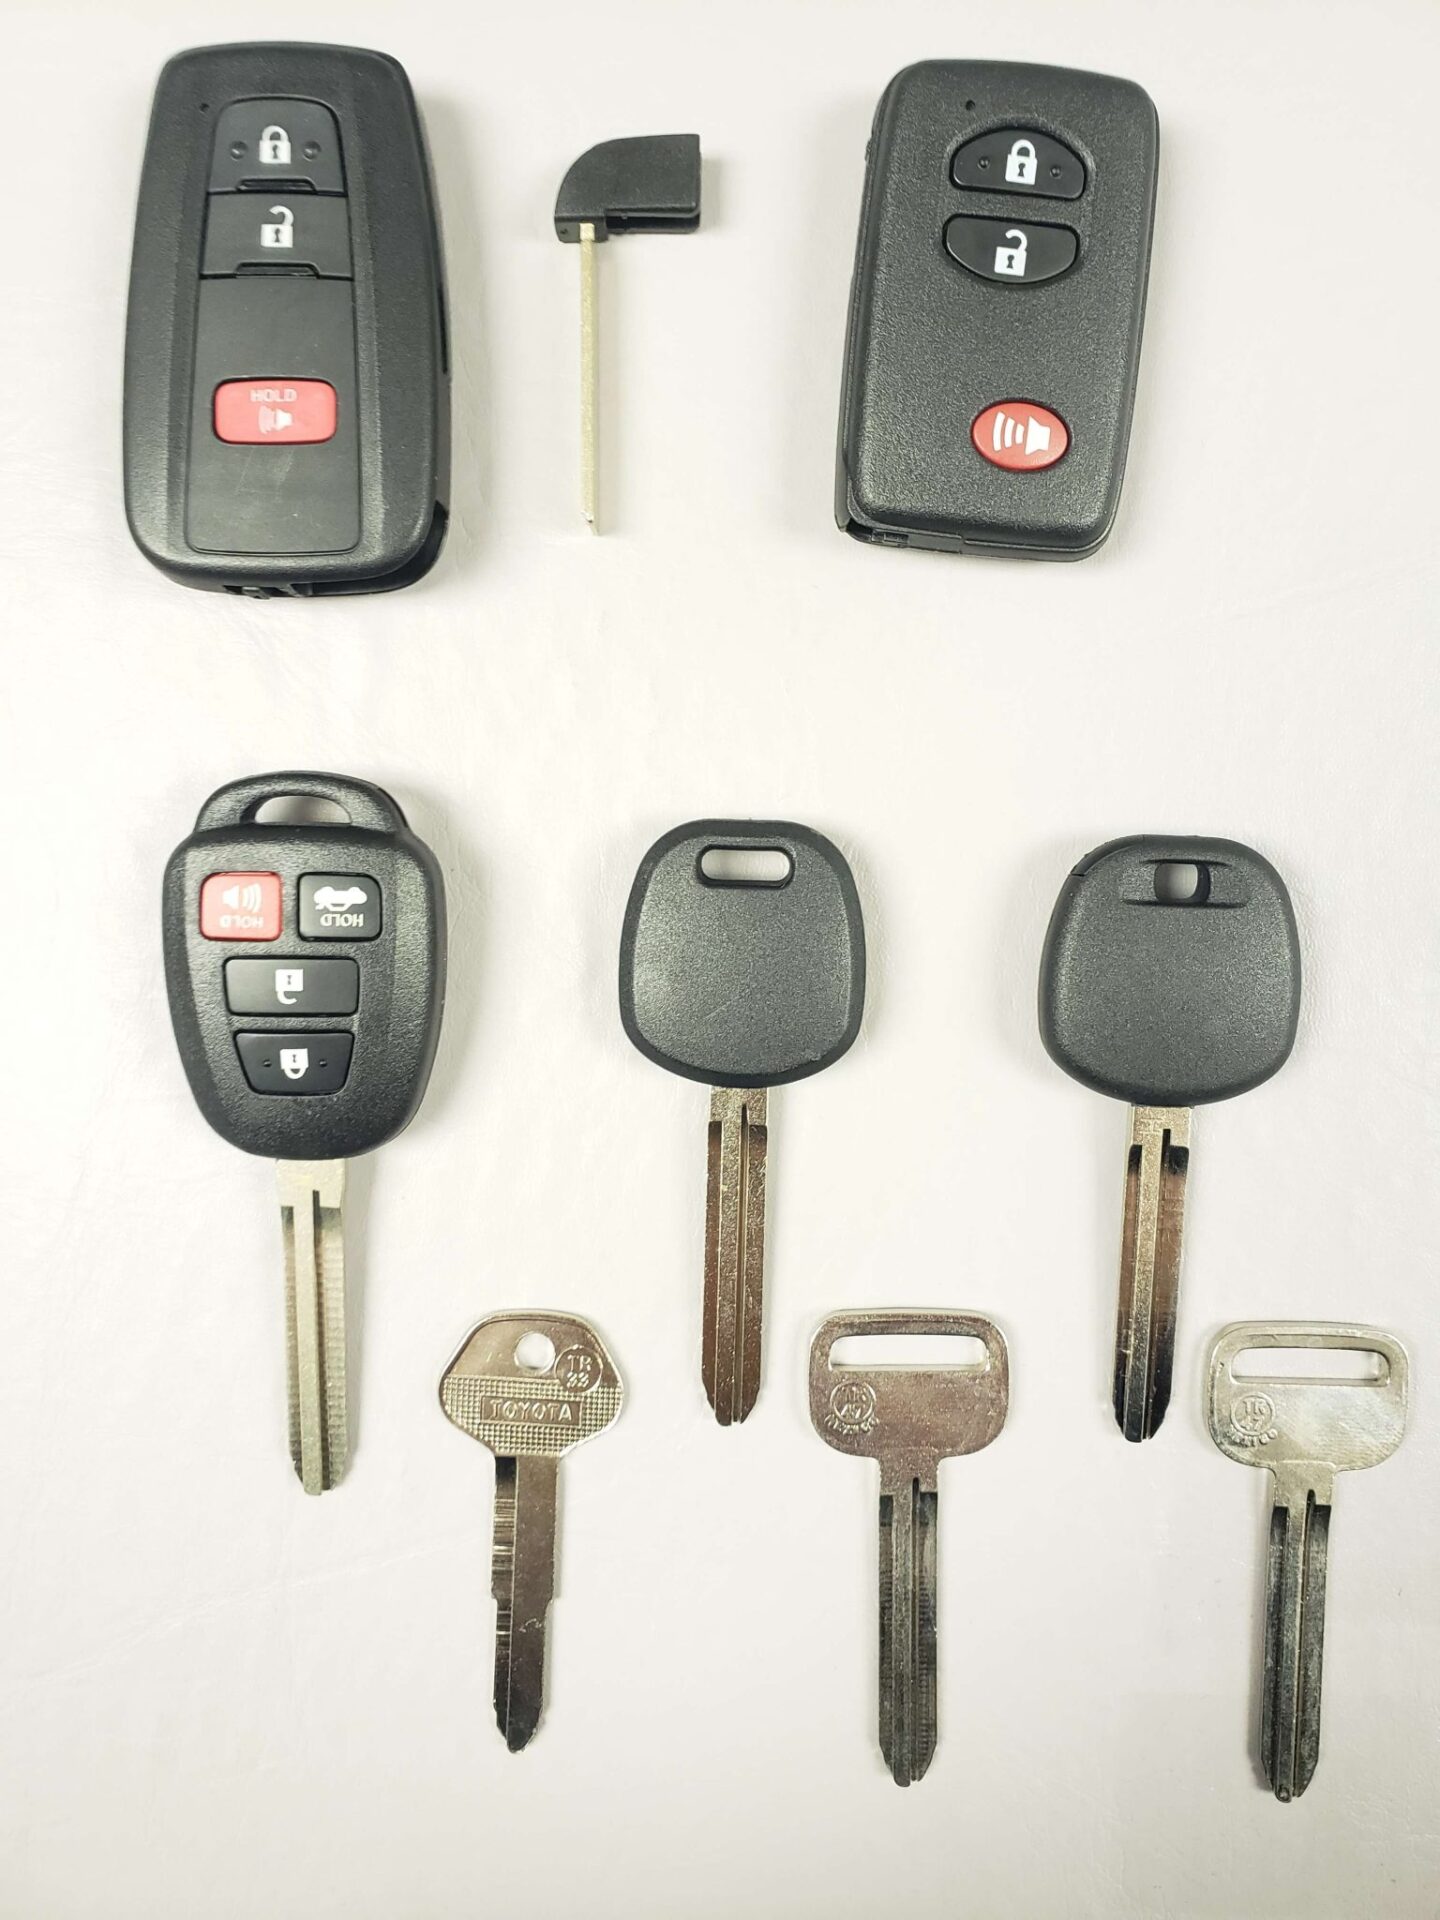 Toyota Prius Key Replacement What To Do, Options, Costs & More